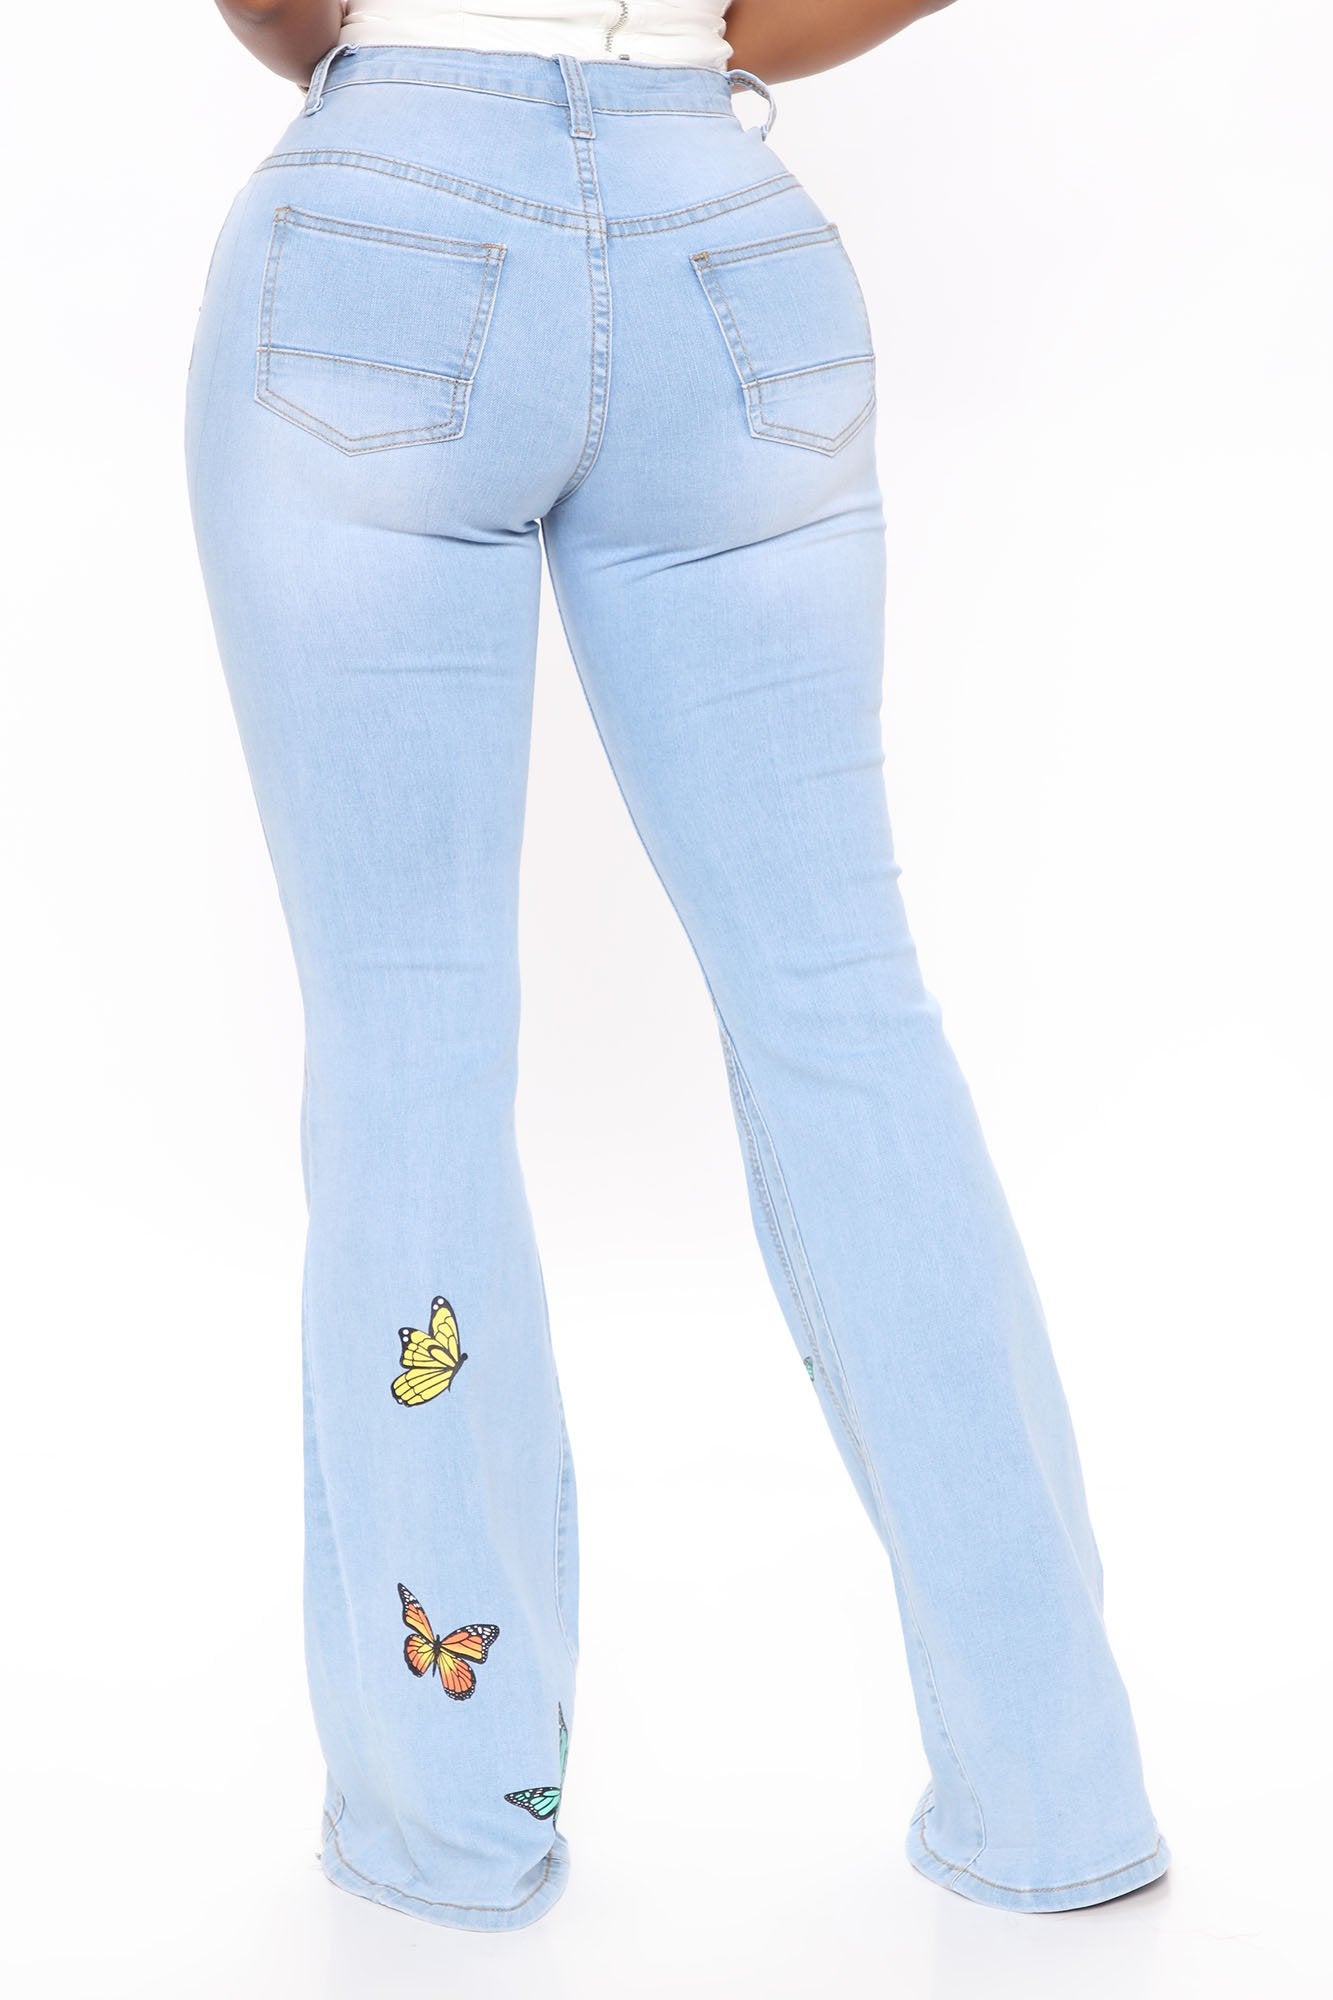 Catching Butterflies Extreme Flare Jeans - Light Blue Wash